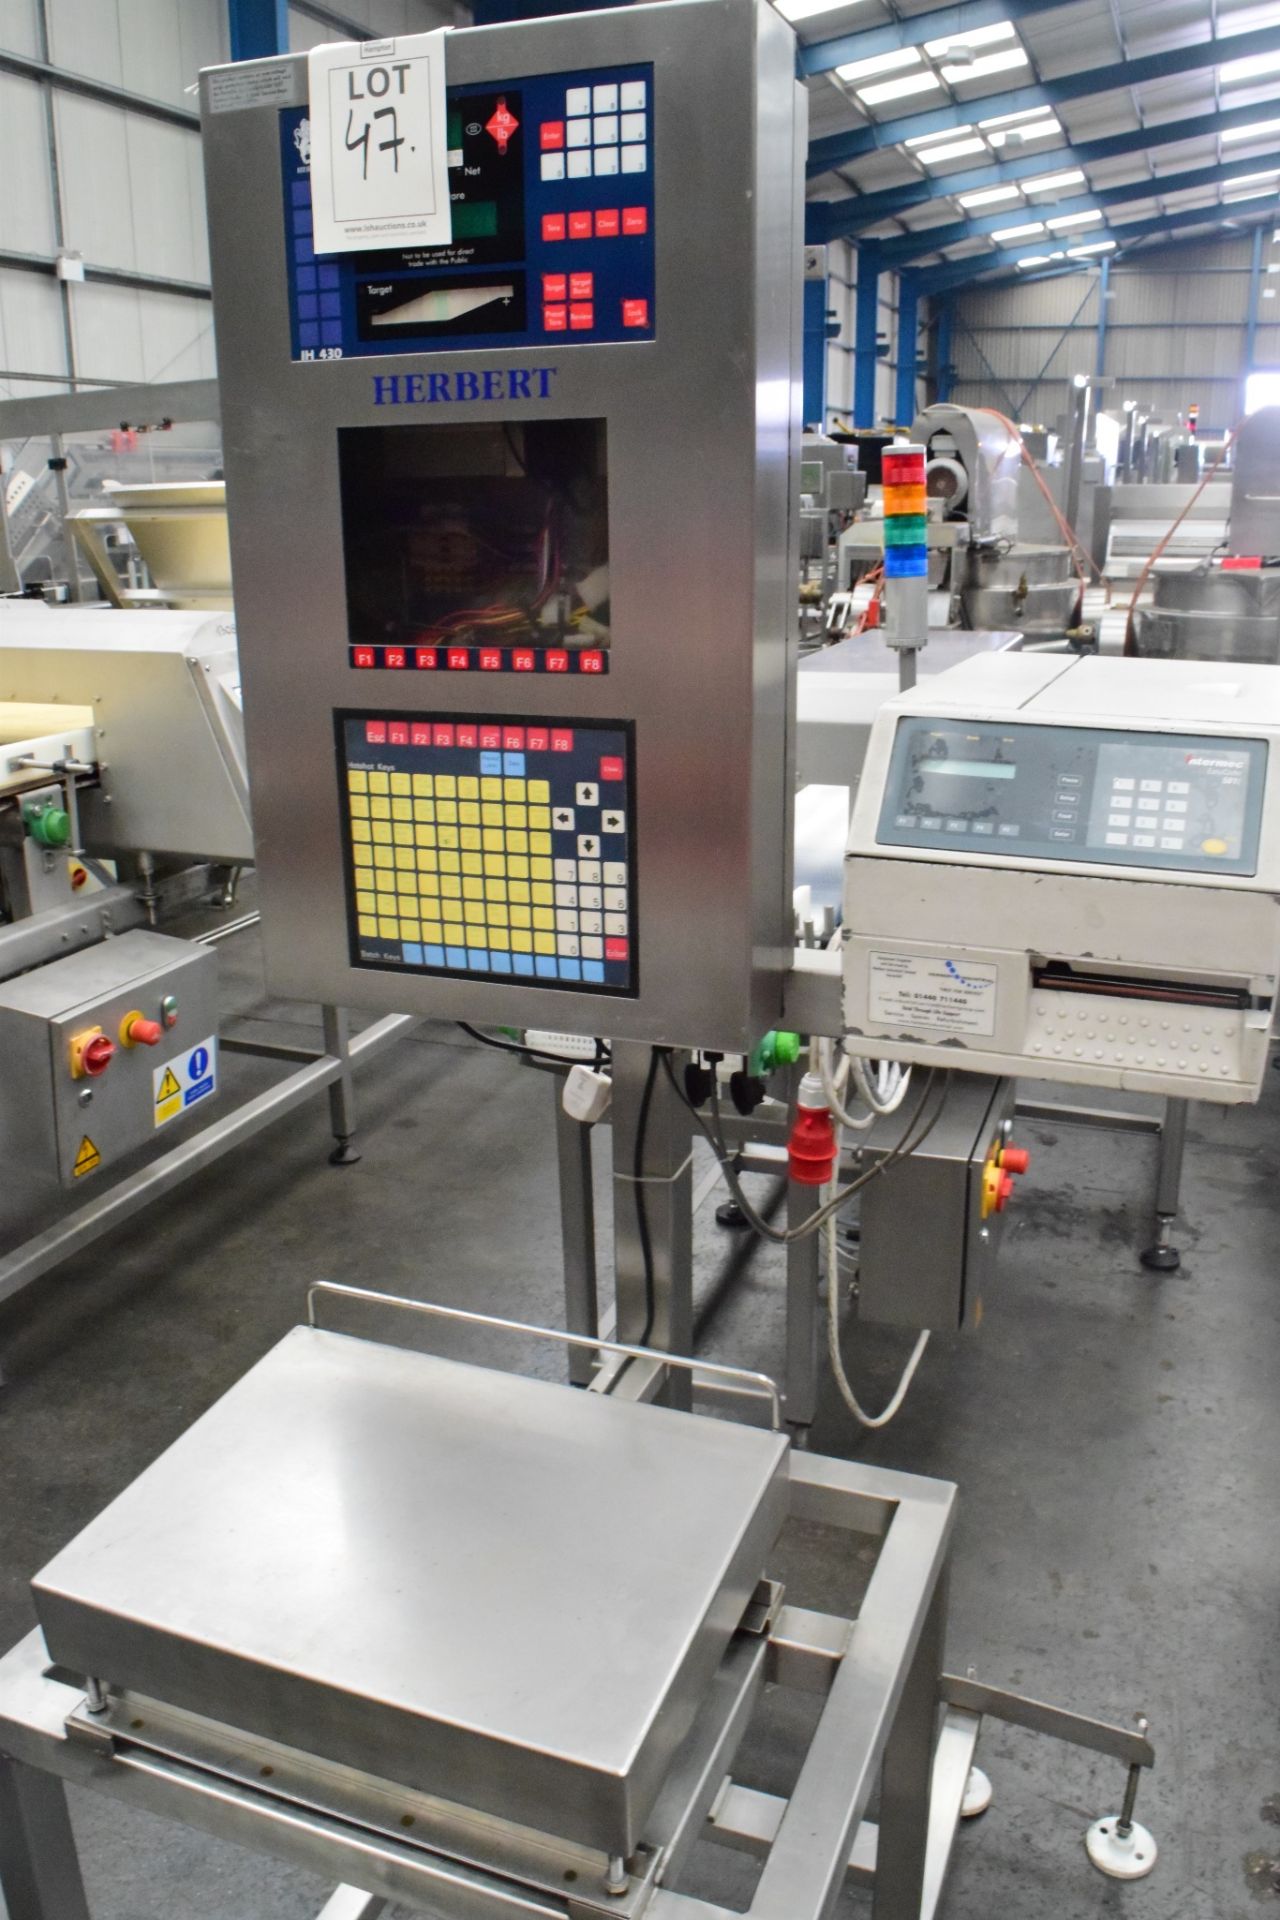 Herbert HI430 scale with Intermec Easy Coder 501E, on stand, platform size: 400 x 300, single phase, - Image 3 of 4